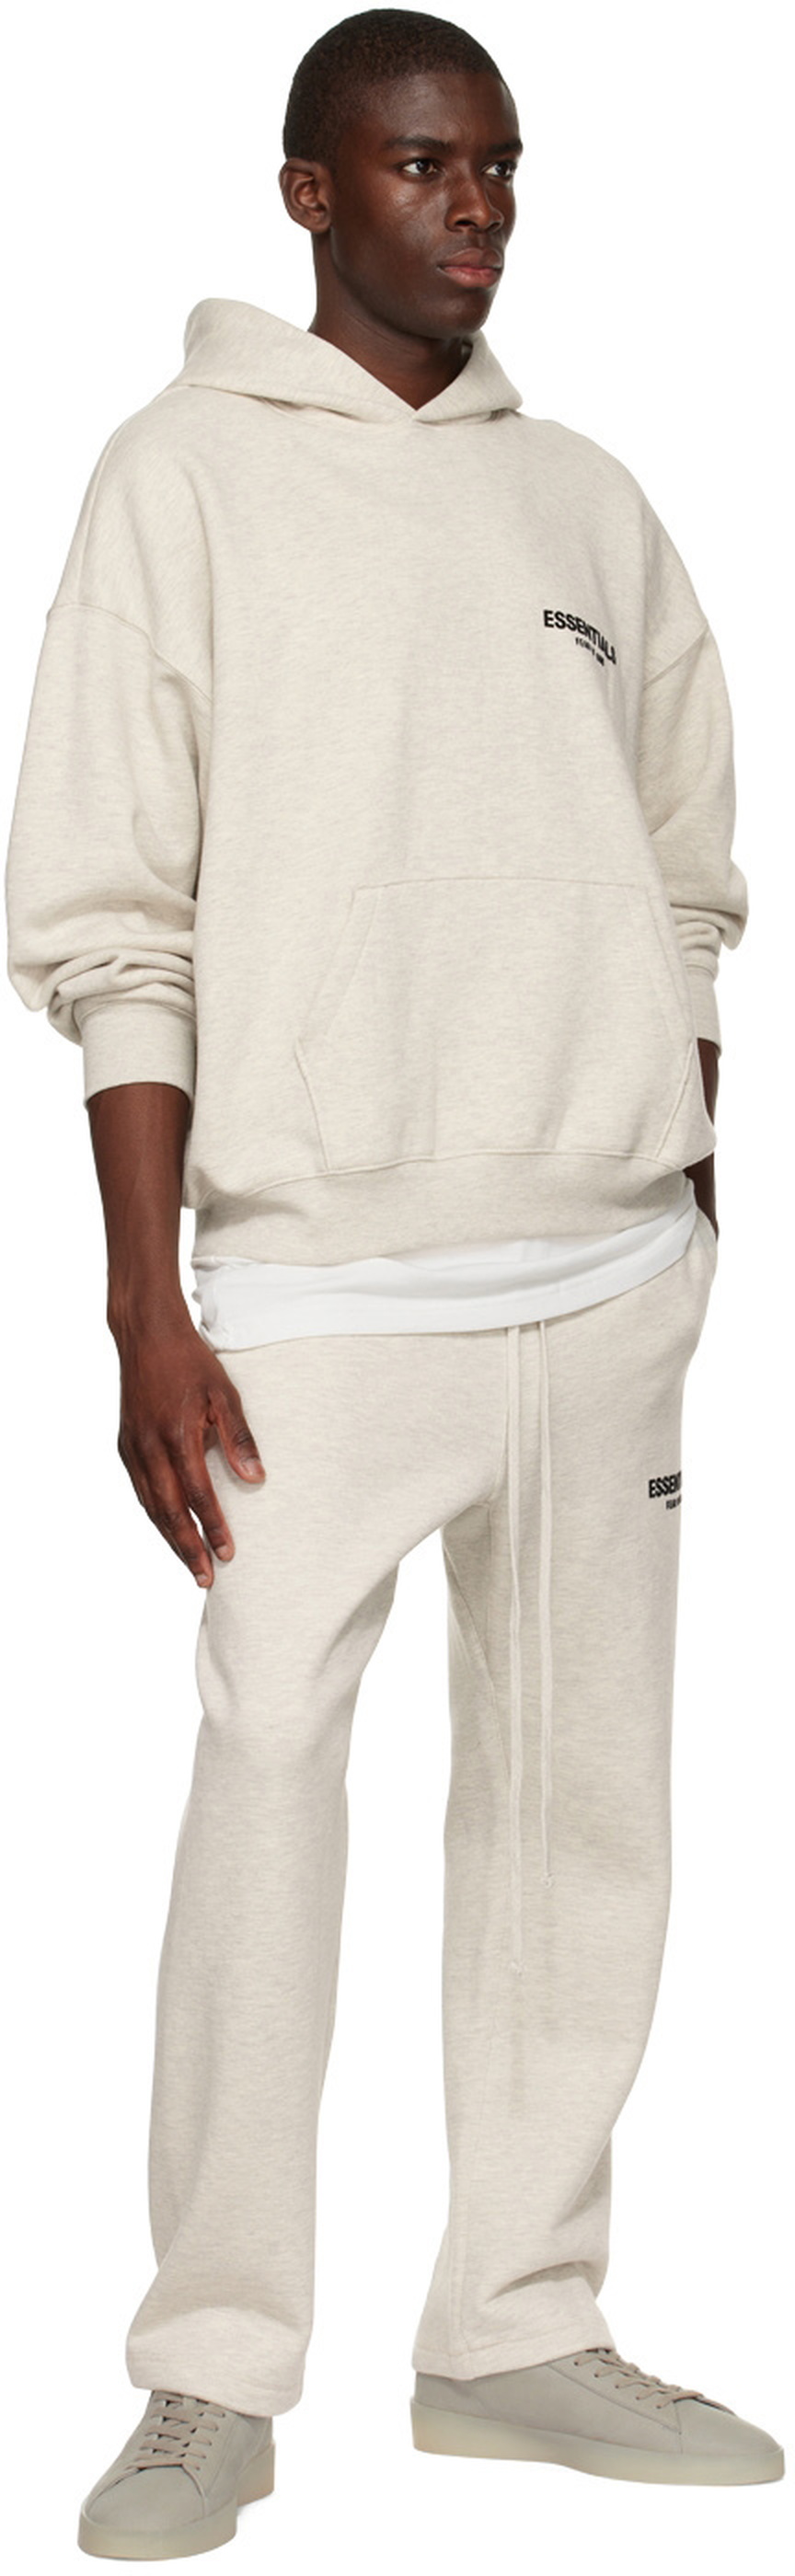 Off-White Relaxed Lounge Pants by Fear of God ESSENTIALS on Sale